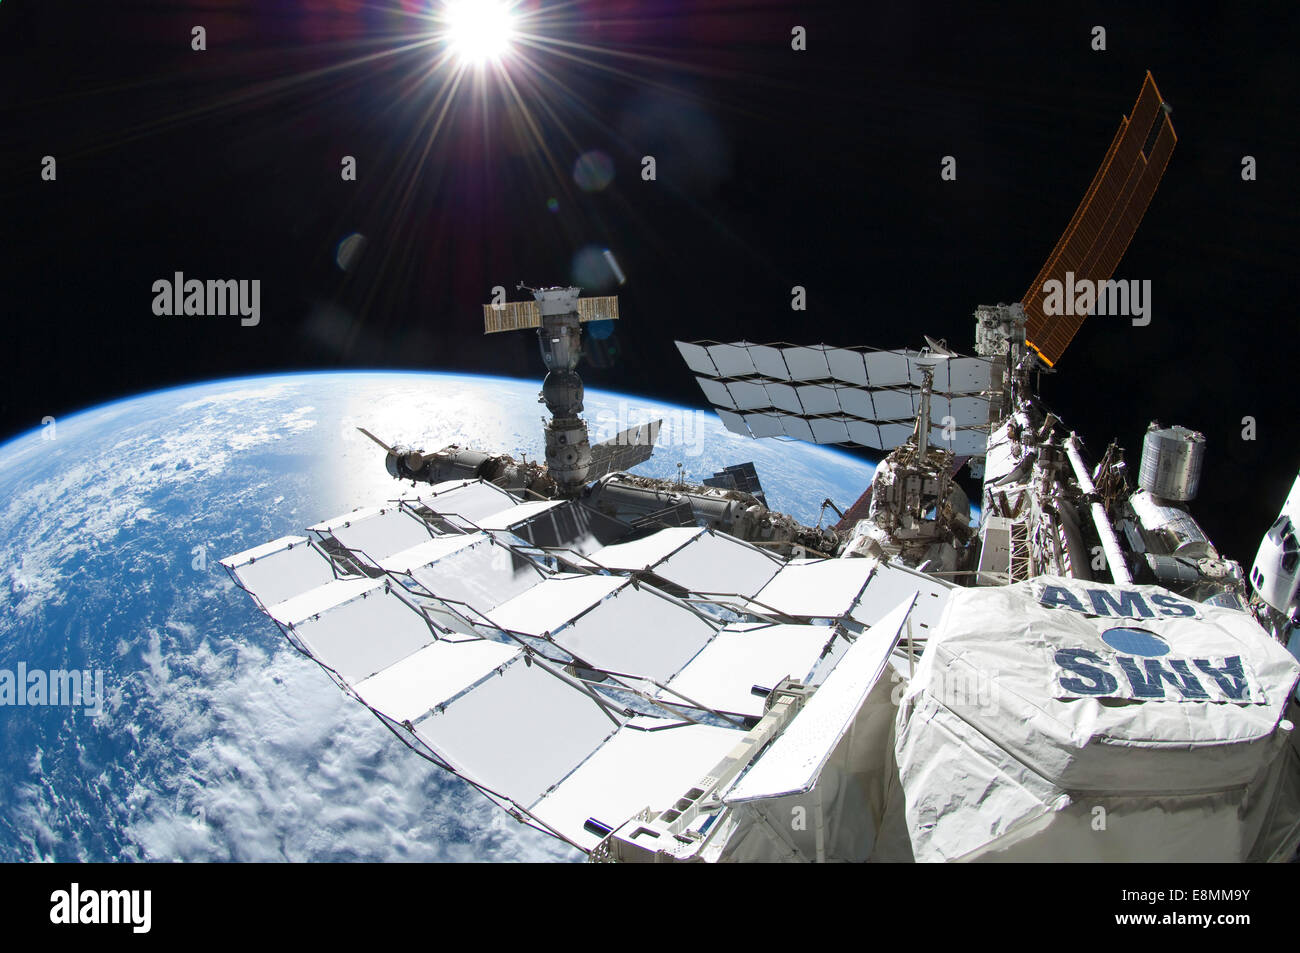 July 12, 2011 - View of the International Space Station with space shuttle Atlantis docked at the edge of the frame on the far r Stock Photo